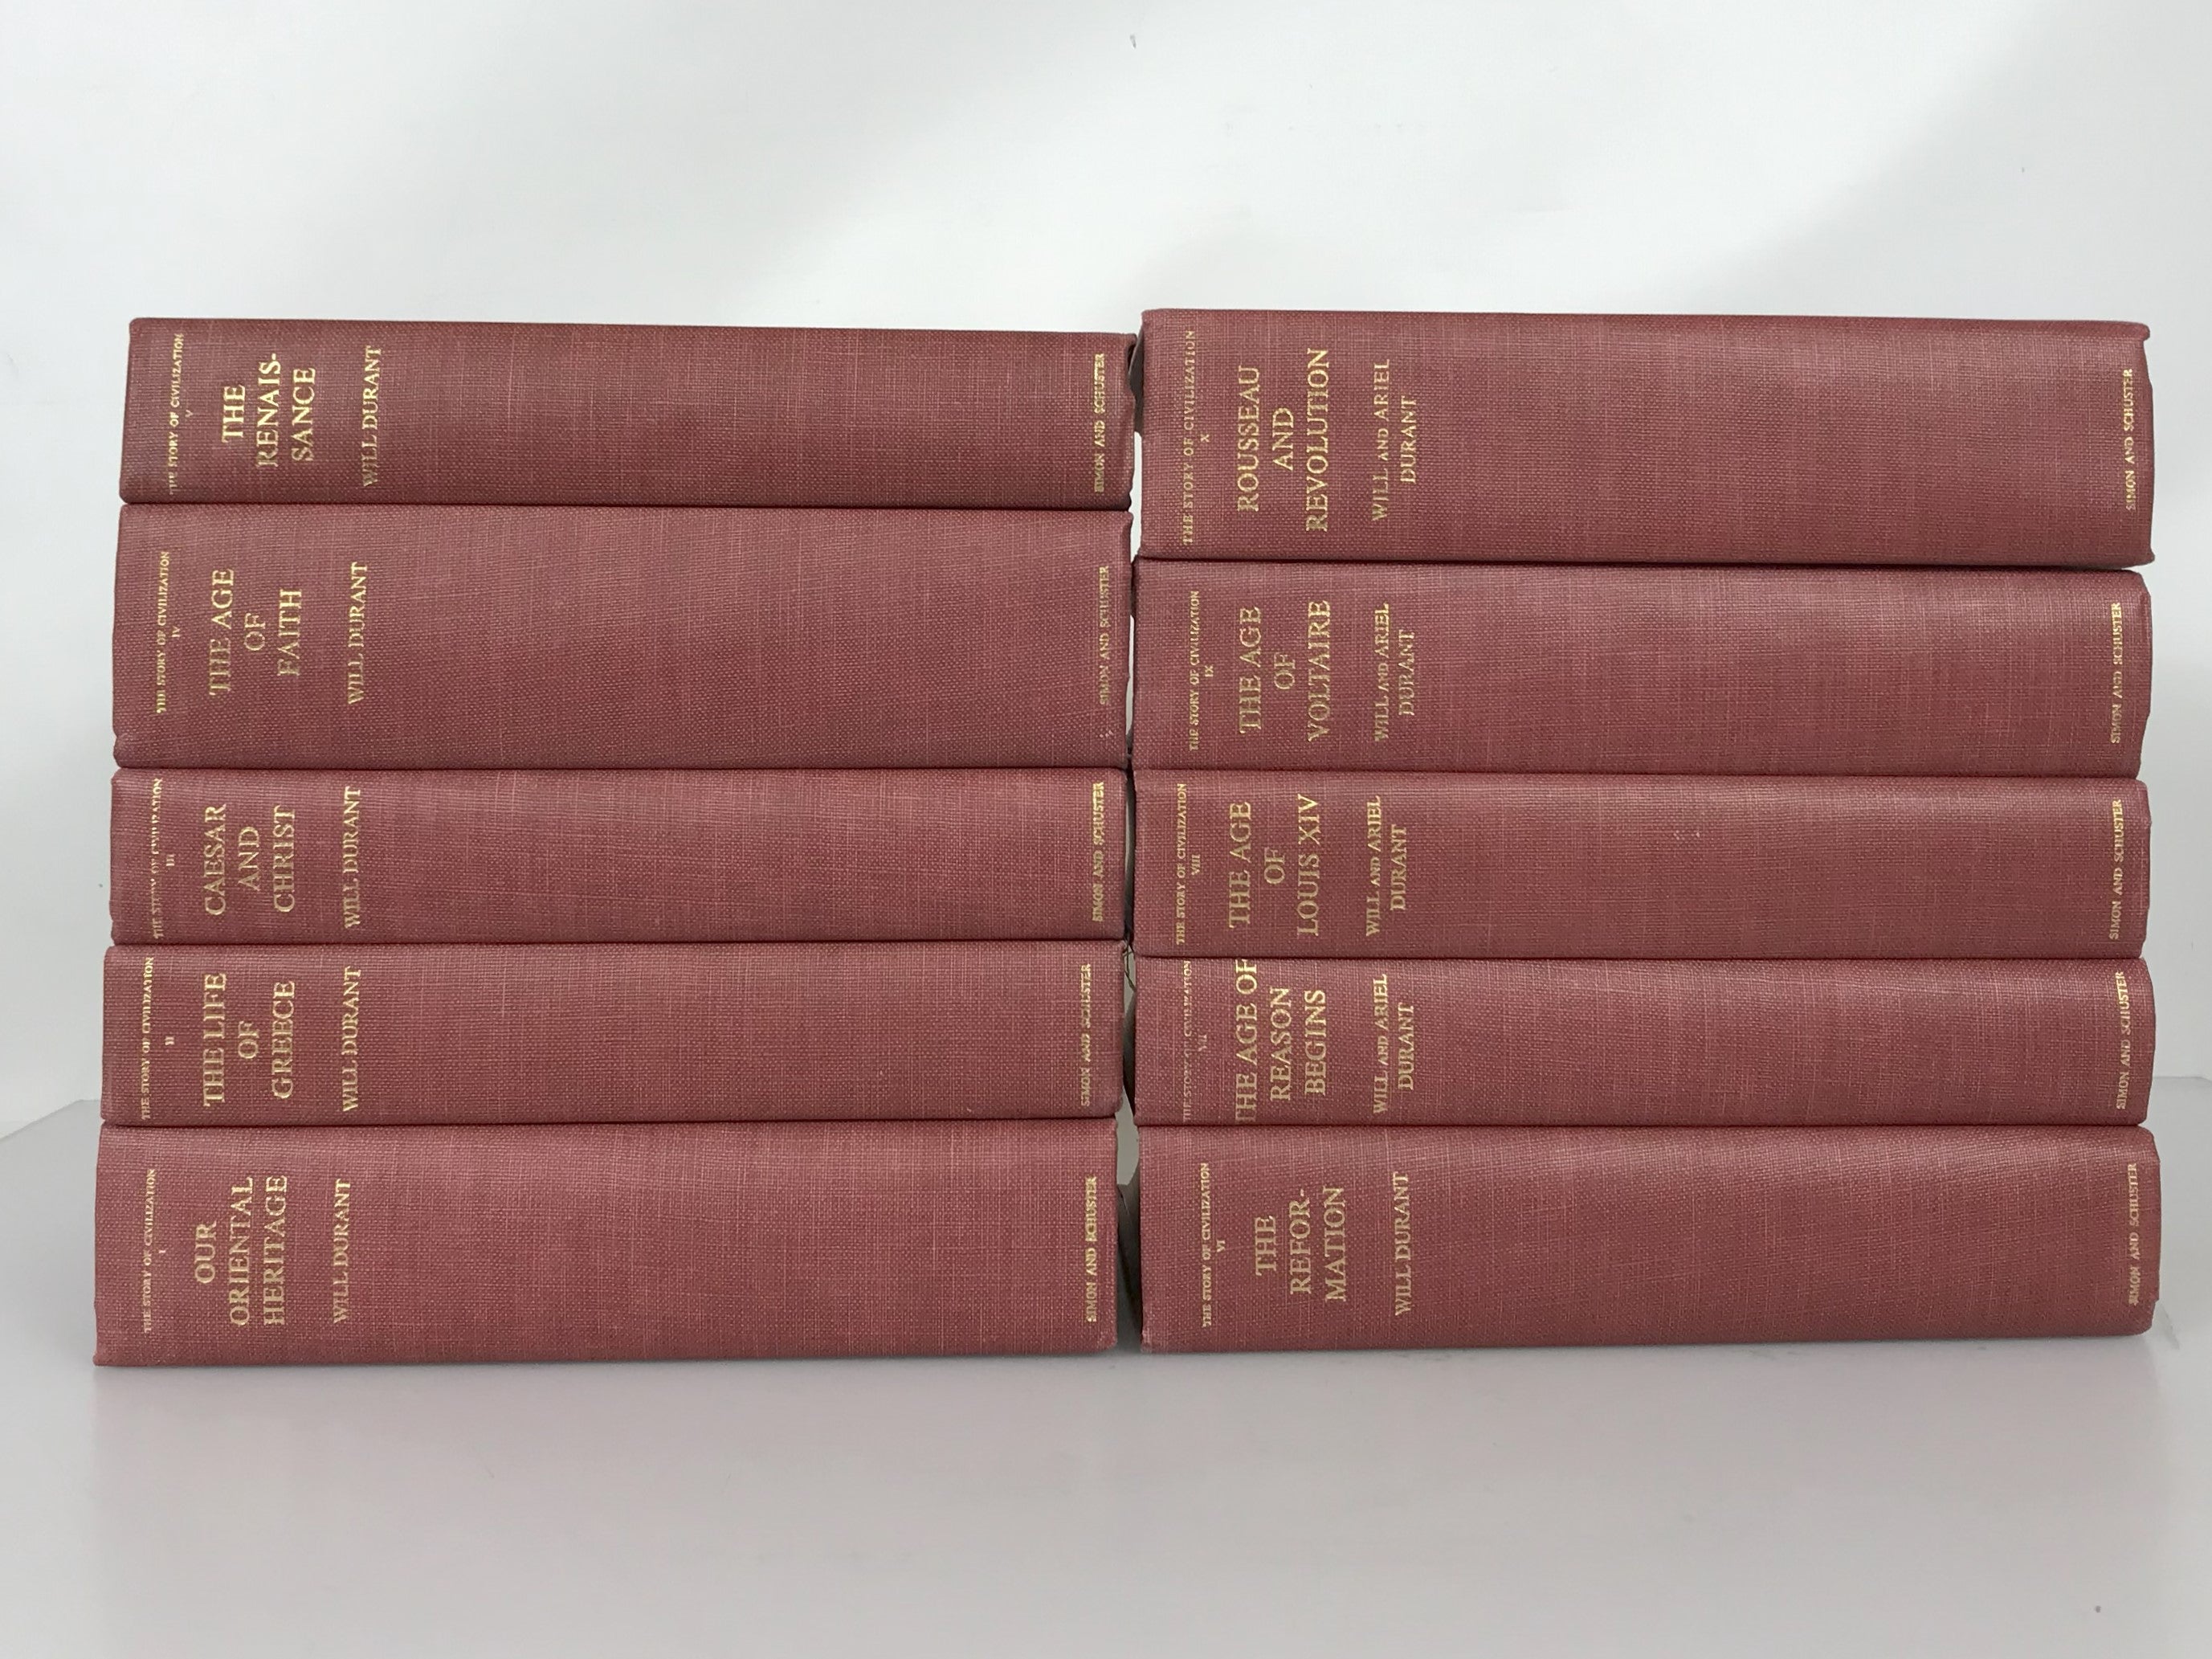 The Story of Civilization Vol 1-10 by Will and Ariel Durant 1950s